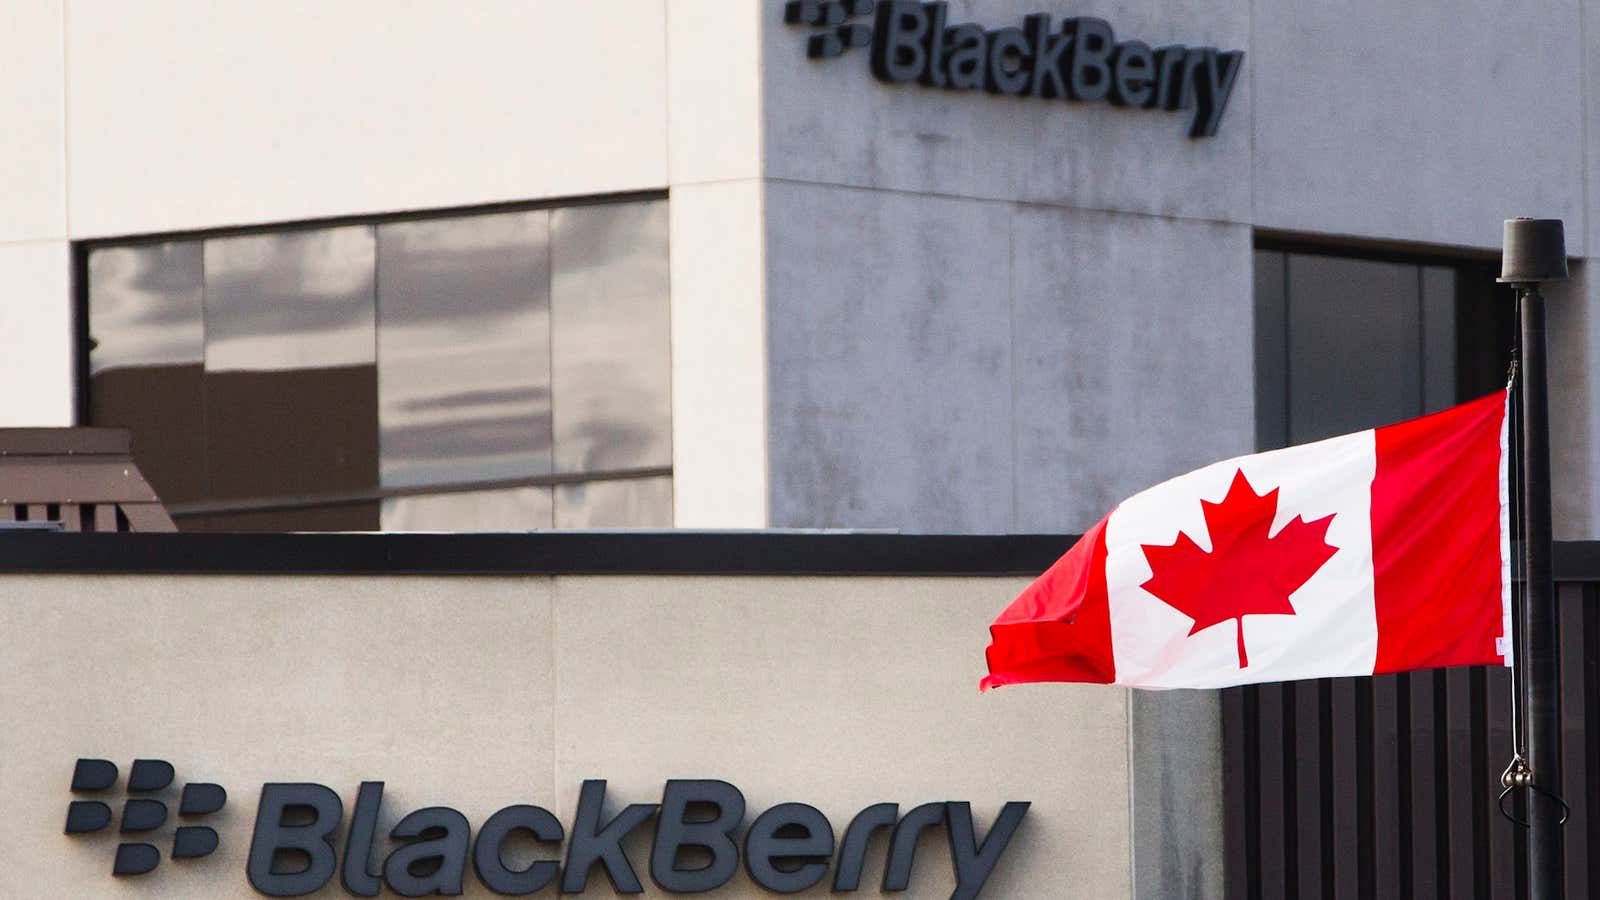 Canada wants BlackBerry sold soon, whether whole or in pieces.